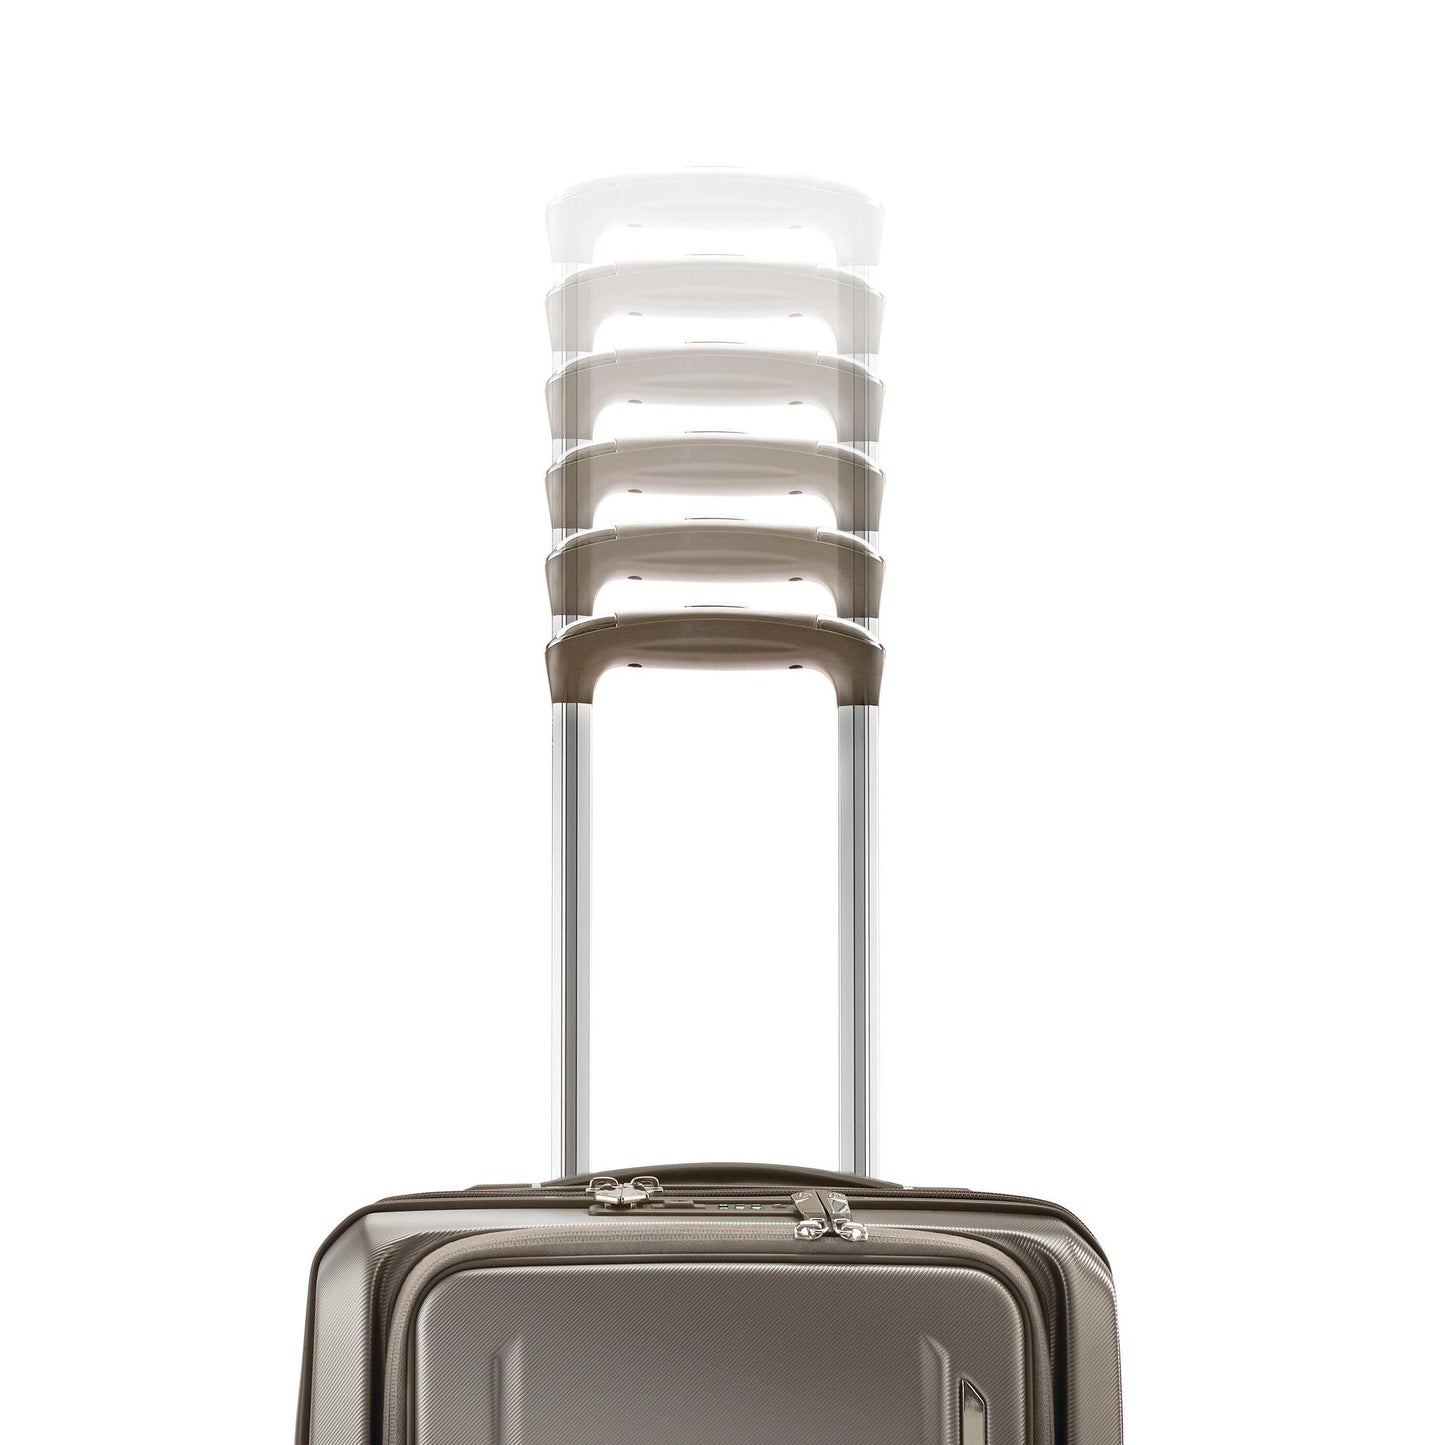 Samsonite Just Right Carry-On Spinner (SMALL)(40% OFF in Store)